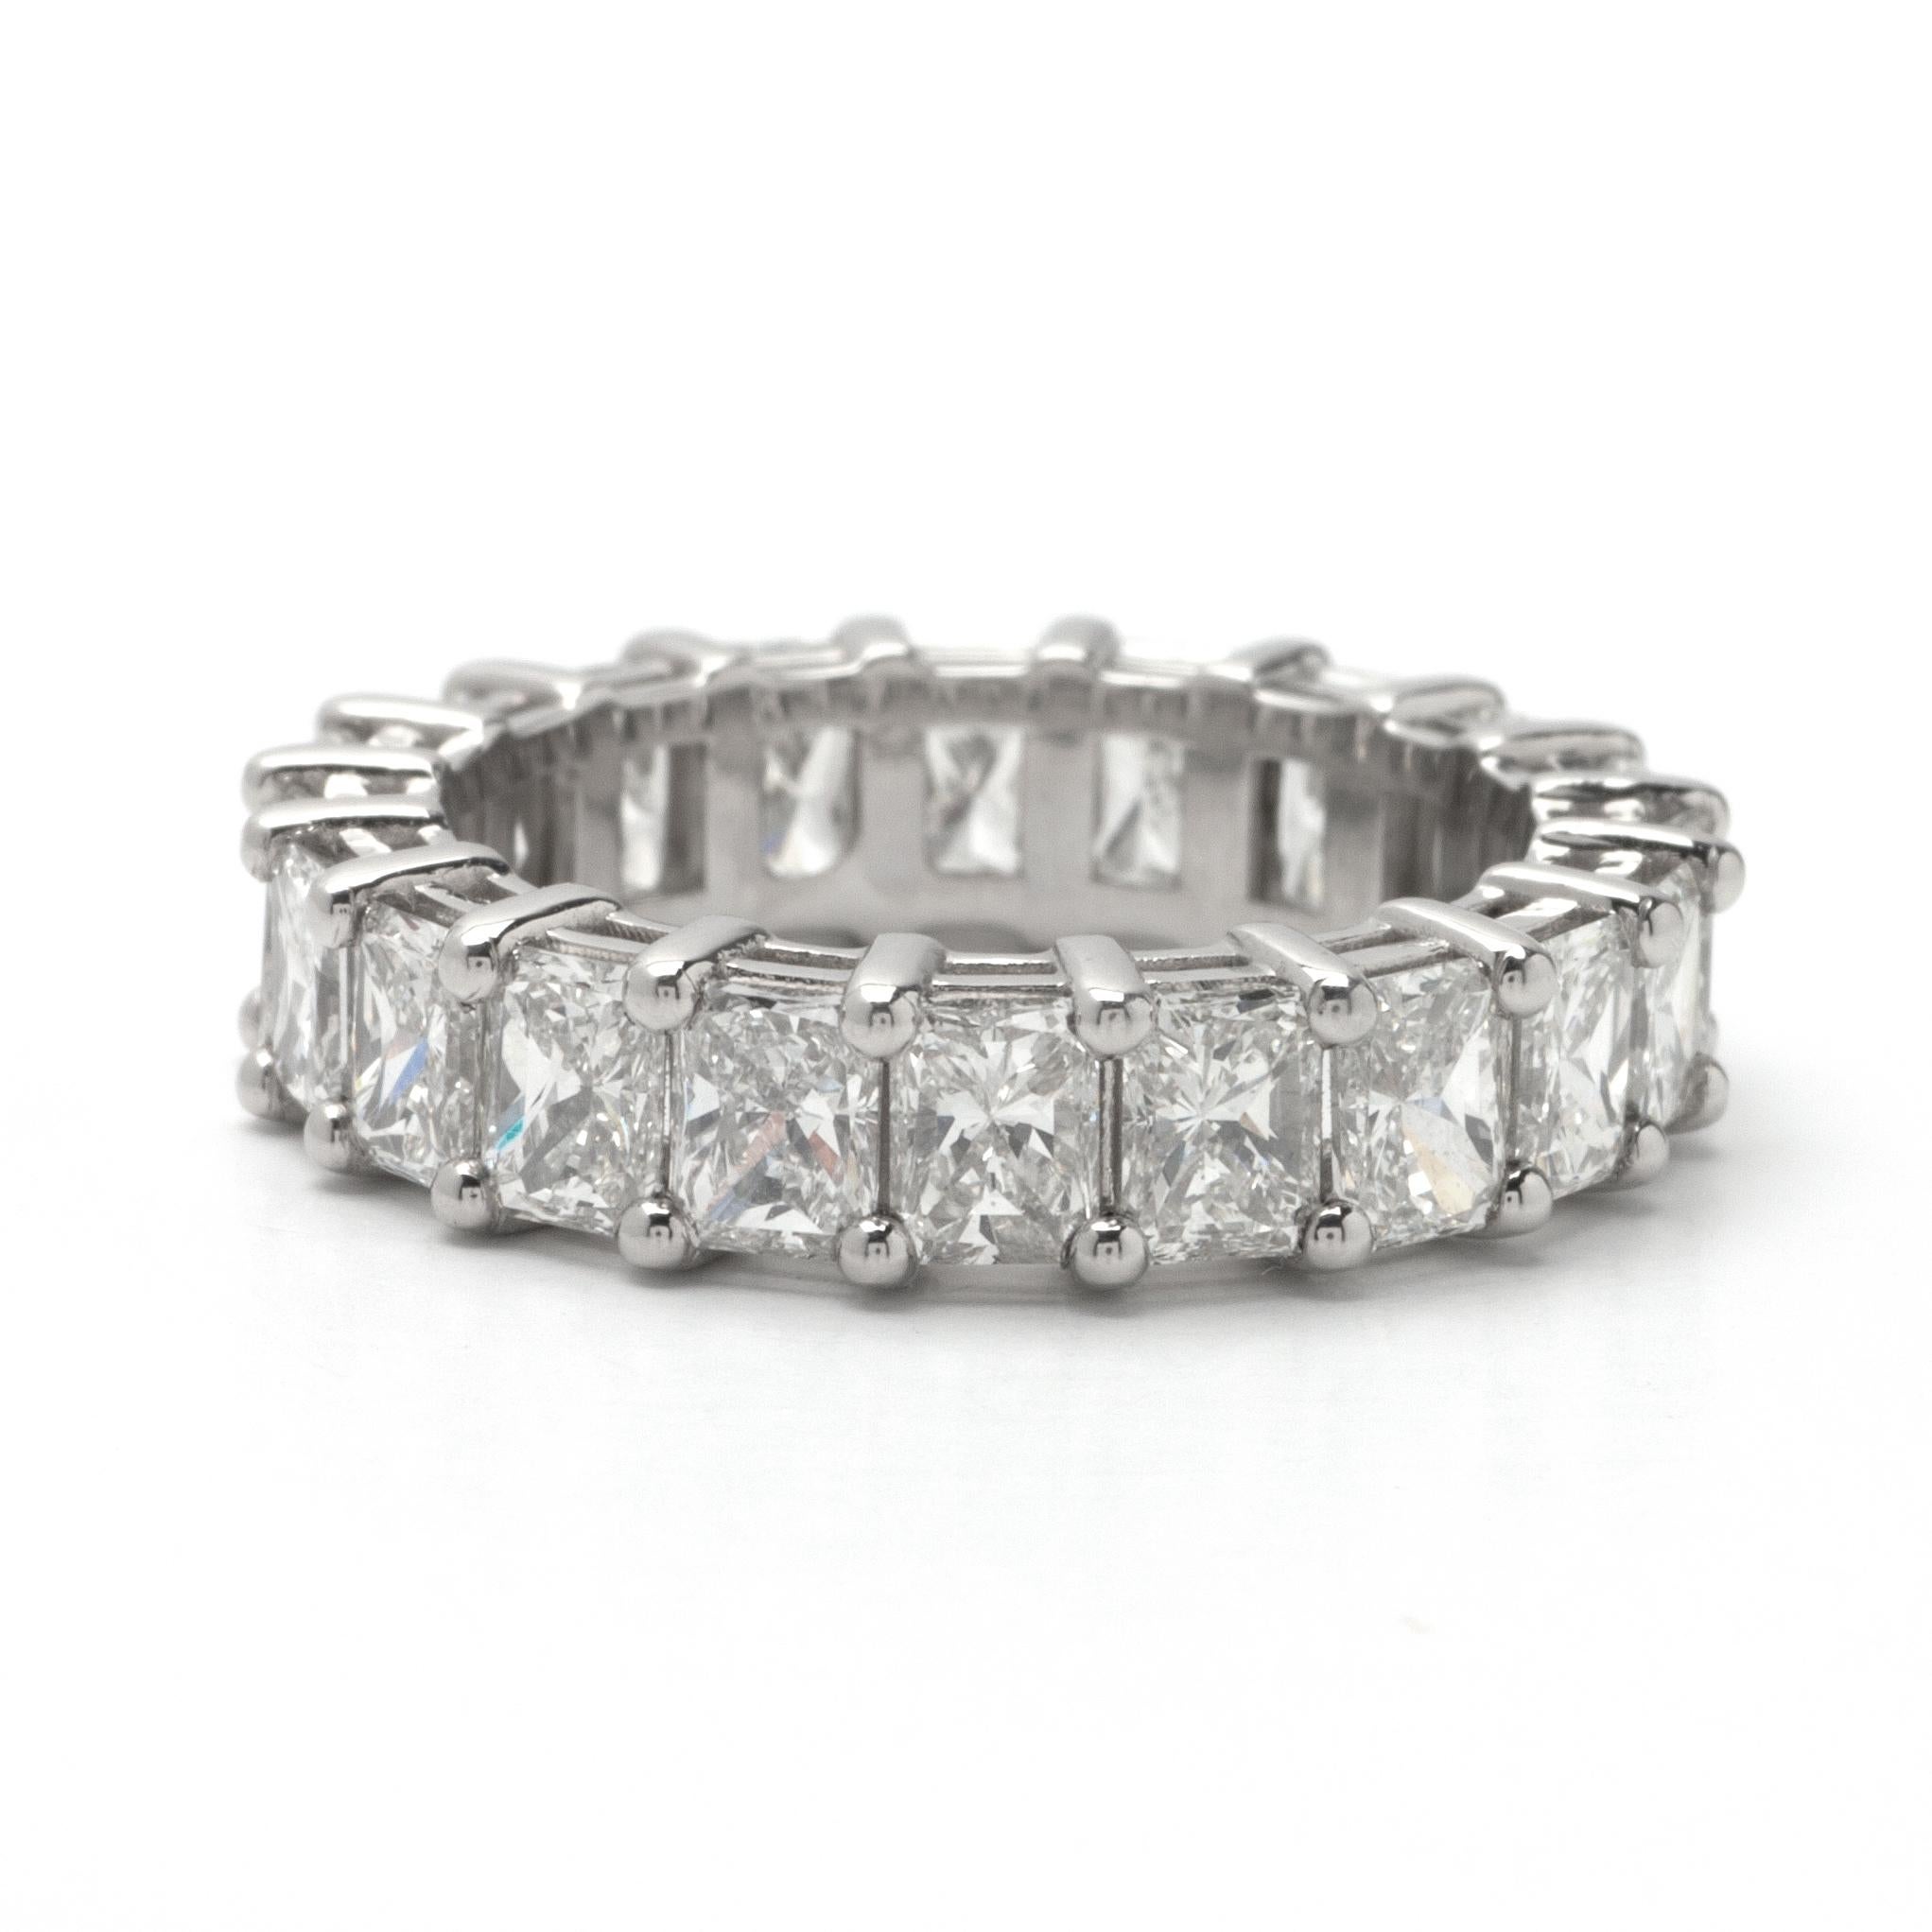 This gorgeous ring is a radiant eternity band for that special someone on any occasion, wedding, birthday, or anniversary. The radiant diamonds are 5.15 total carat weight set in 14k white gold. G color and VS1 clarity.